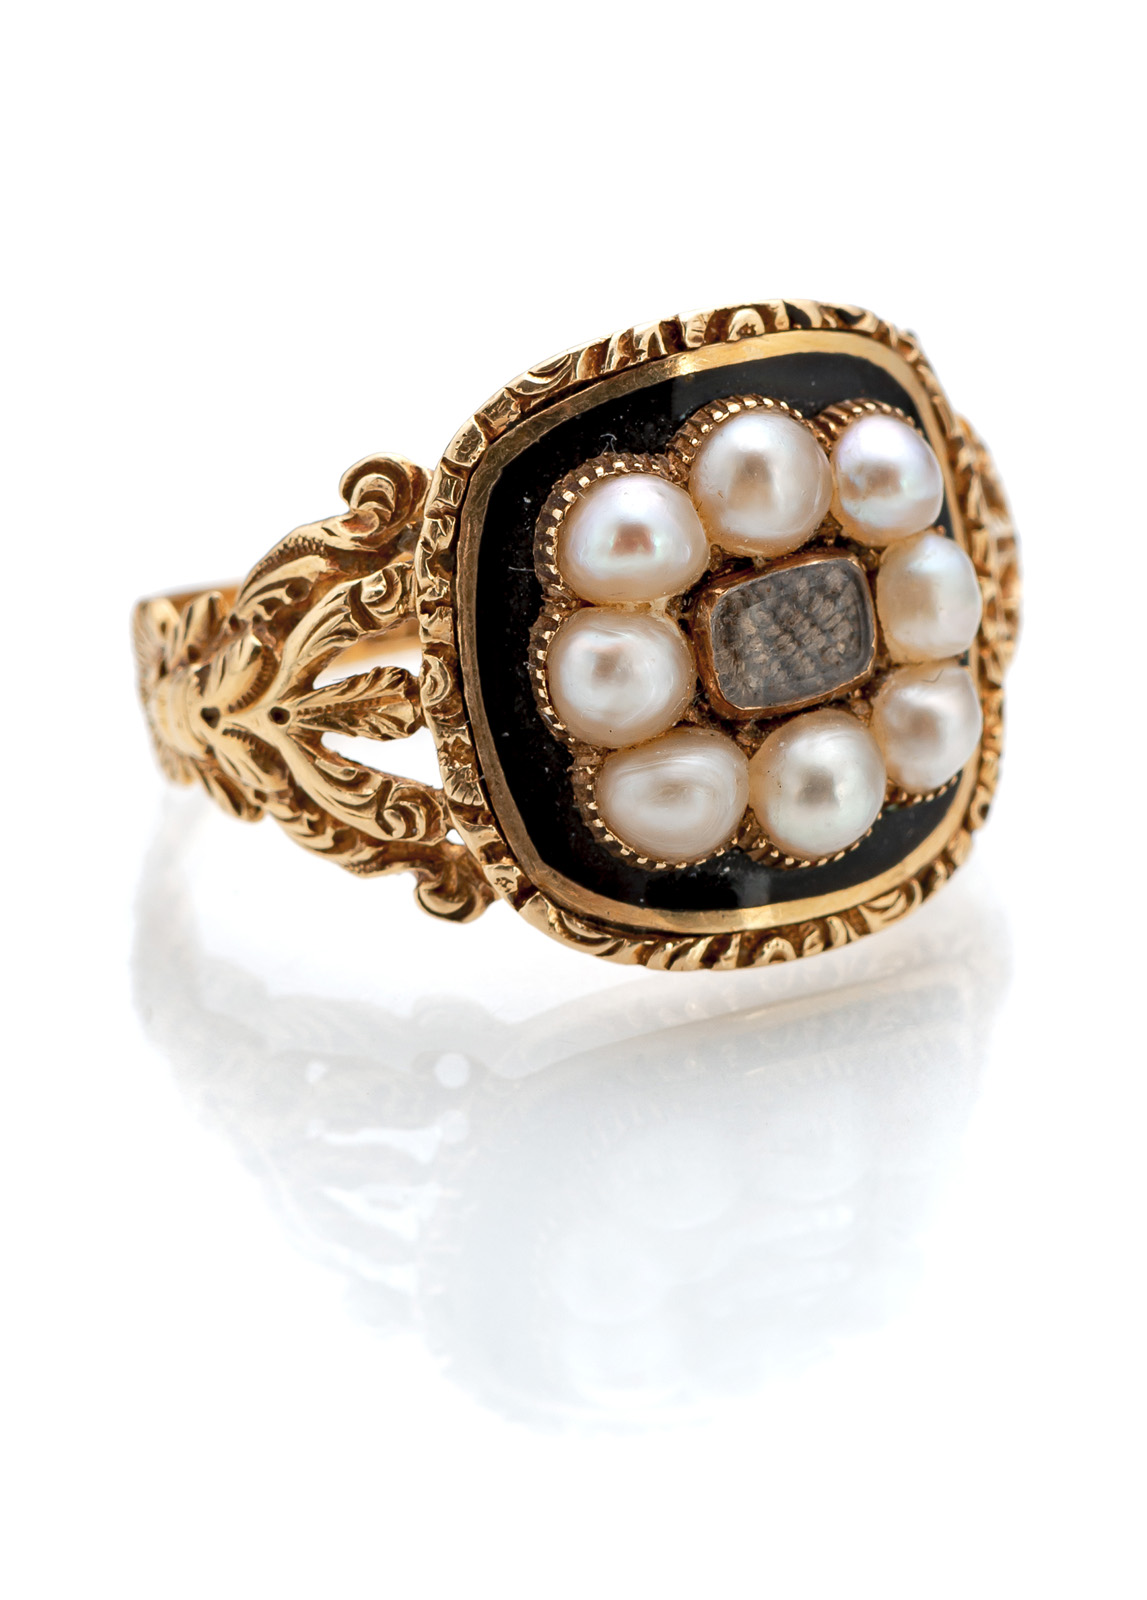 <b>A WILLIAM IV MOURNING AND MEMORY RING WITH HAIRWORK</b>